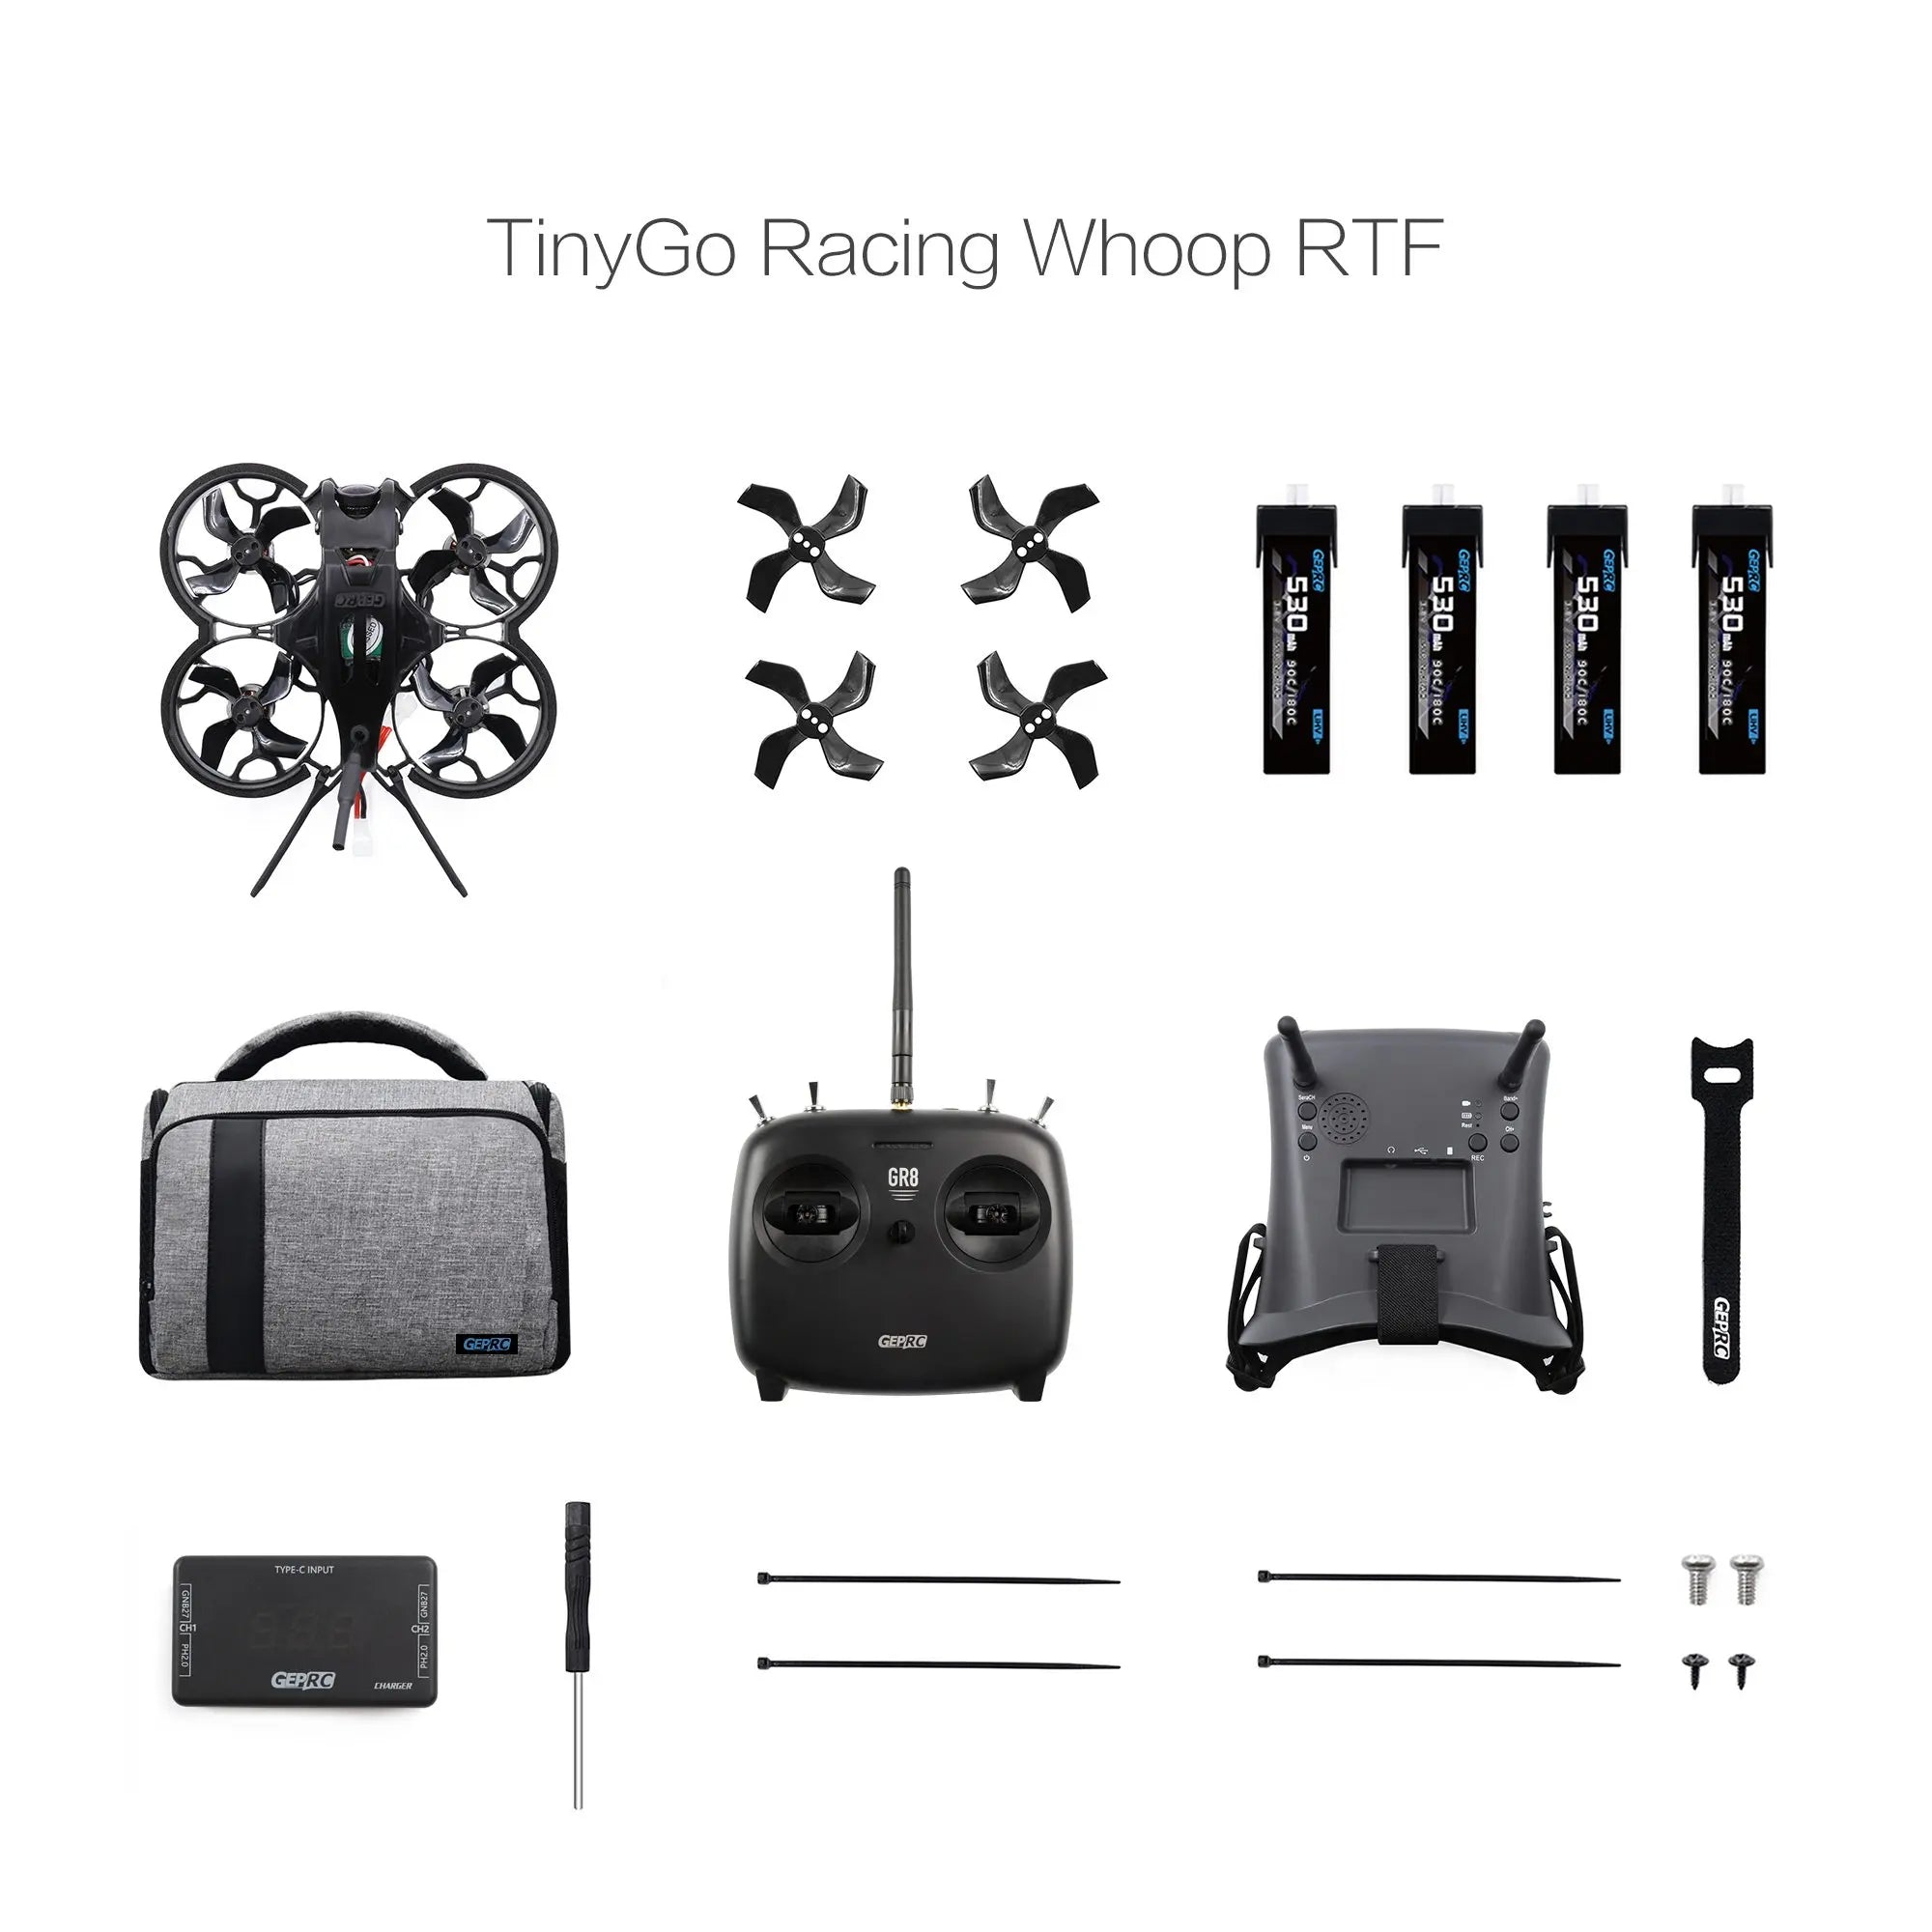 GEPRC TinyGO 4K FPV Whoop RTF is suitable for